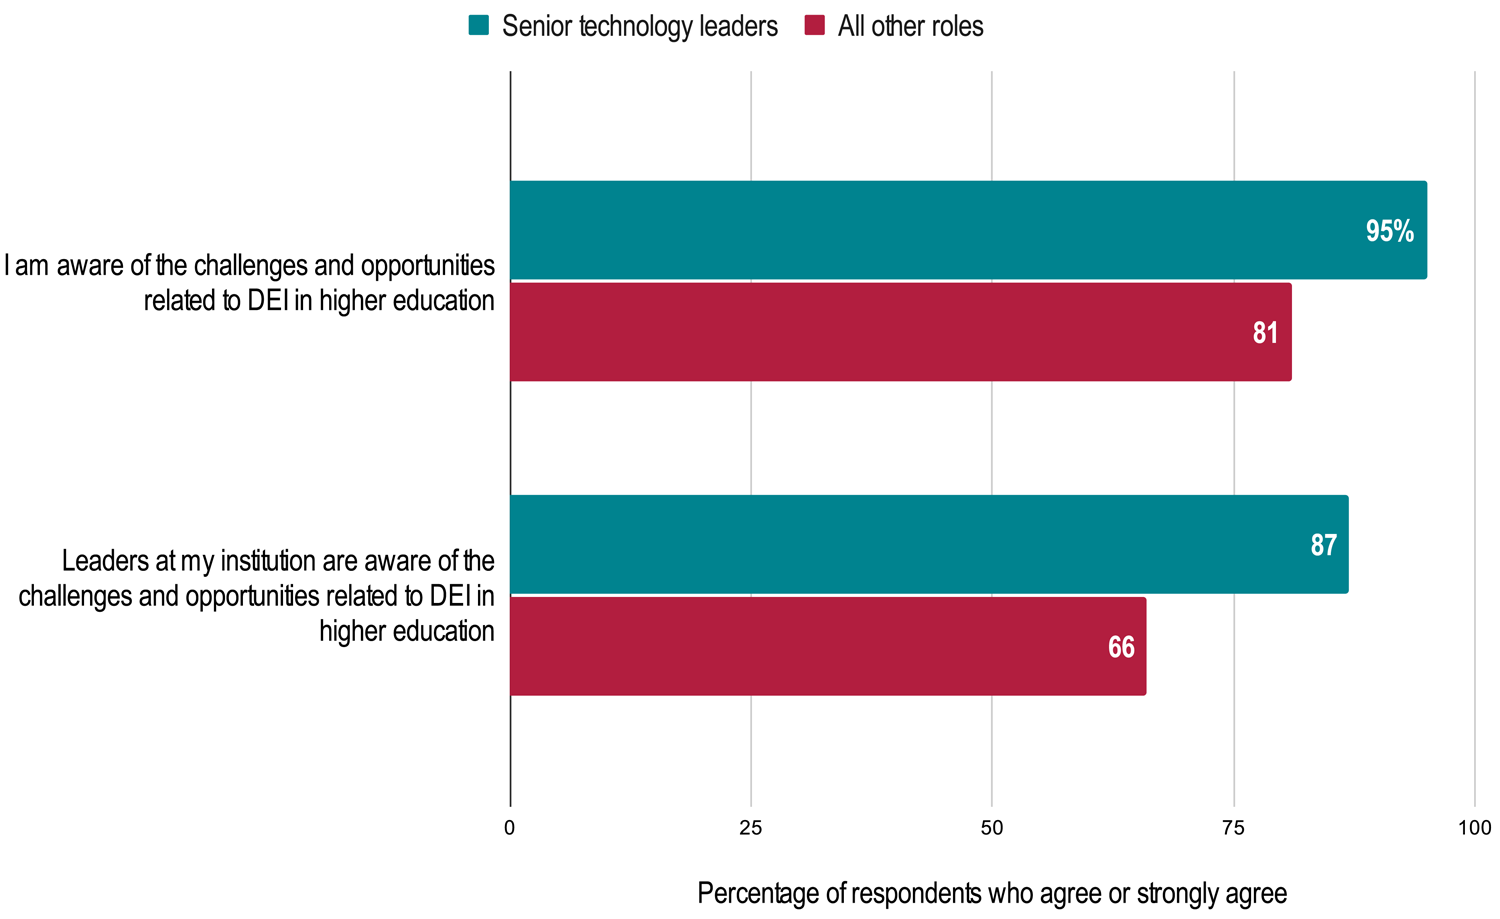 Percentage of respondents who agree or strongly agree. 
I am aware of the challenges and opportunities related to DEI in higher education: Senior technology leaders 95%, All other roles 81%.
Leaders at my institution are aware of the challenges and opportunities related to DEI in higher education: Senior technology leaders 87%, All other roles 66%.